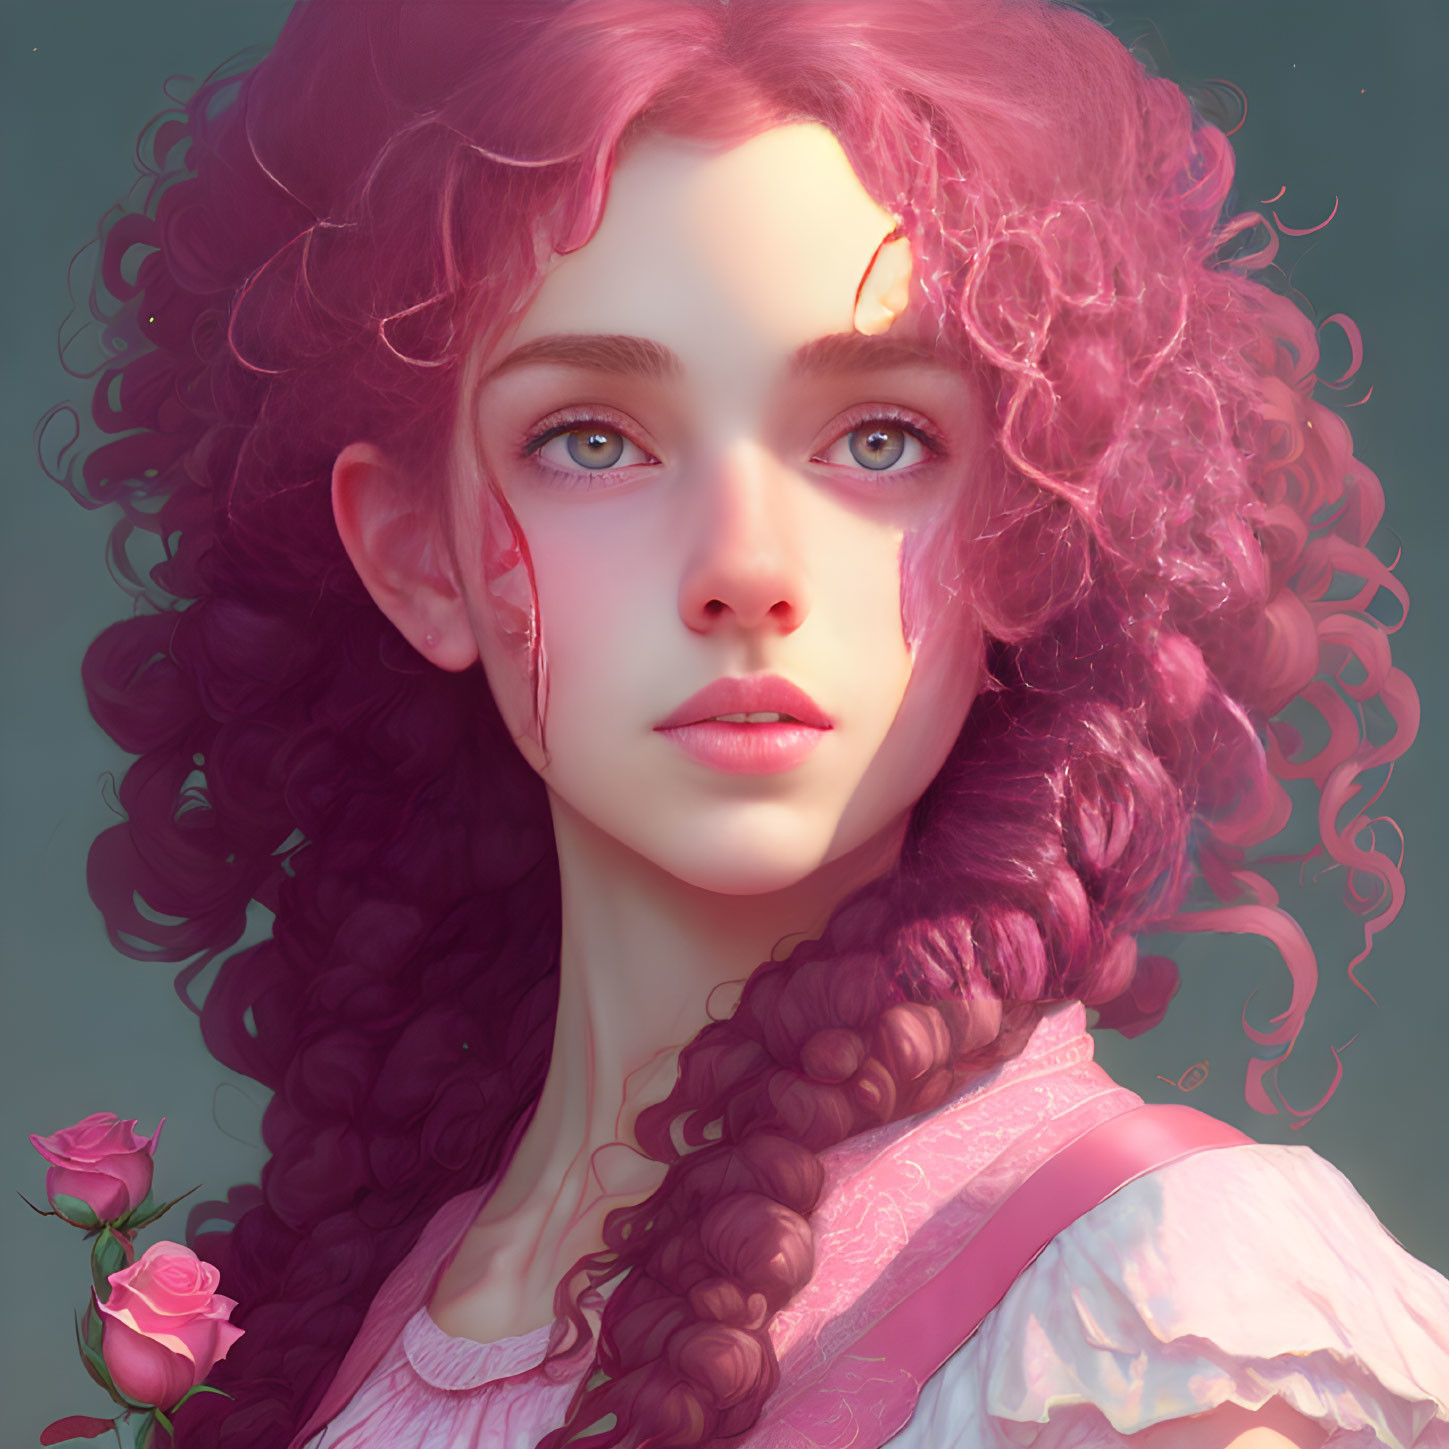 Digital illustration of girl with curly pink hair, pointed ears, blue eyes, and roses